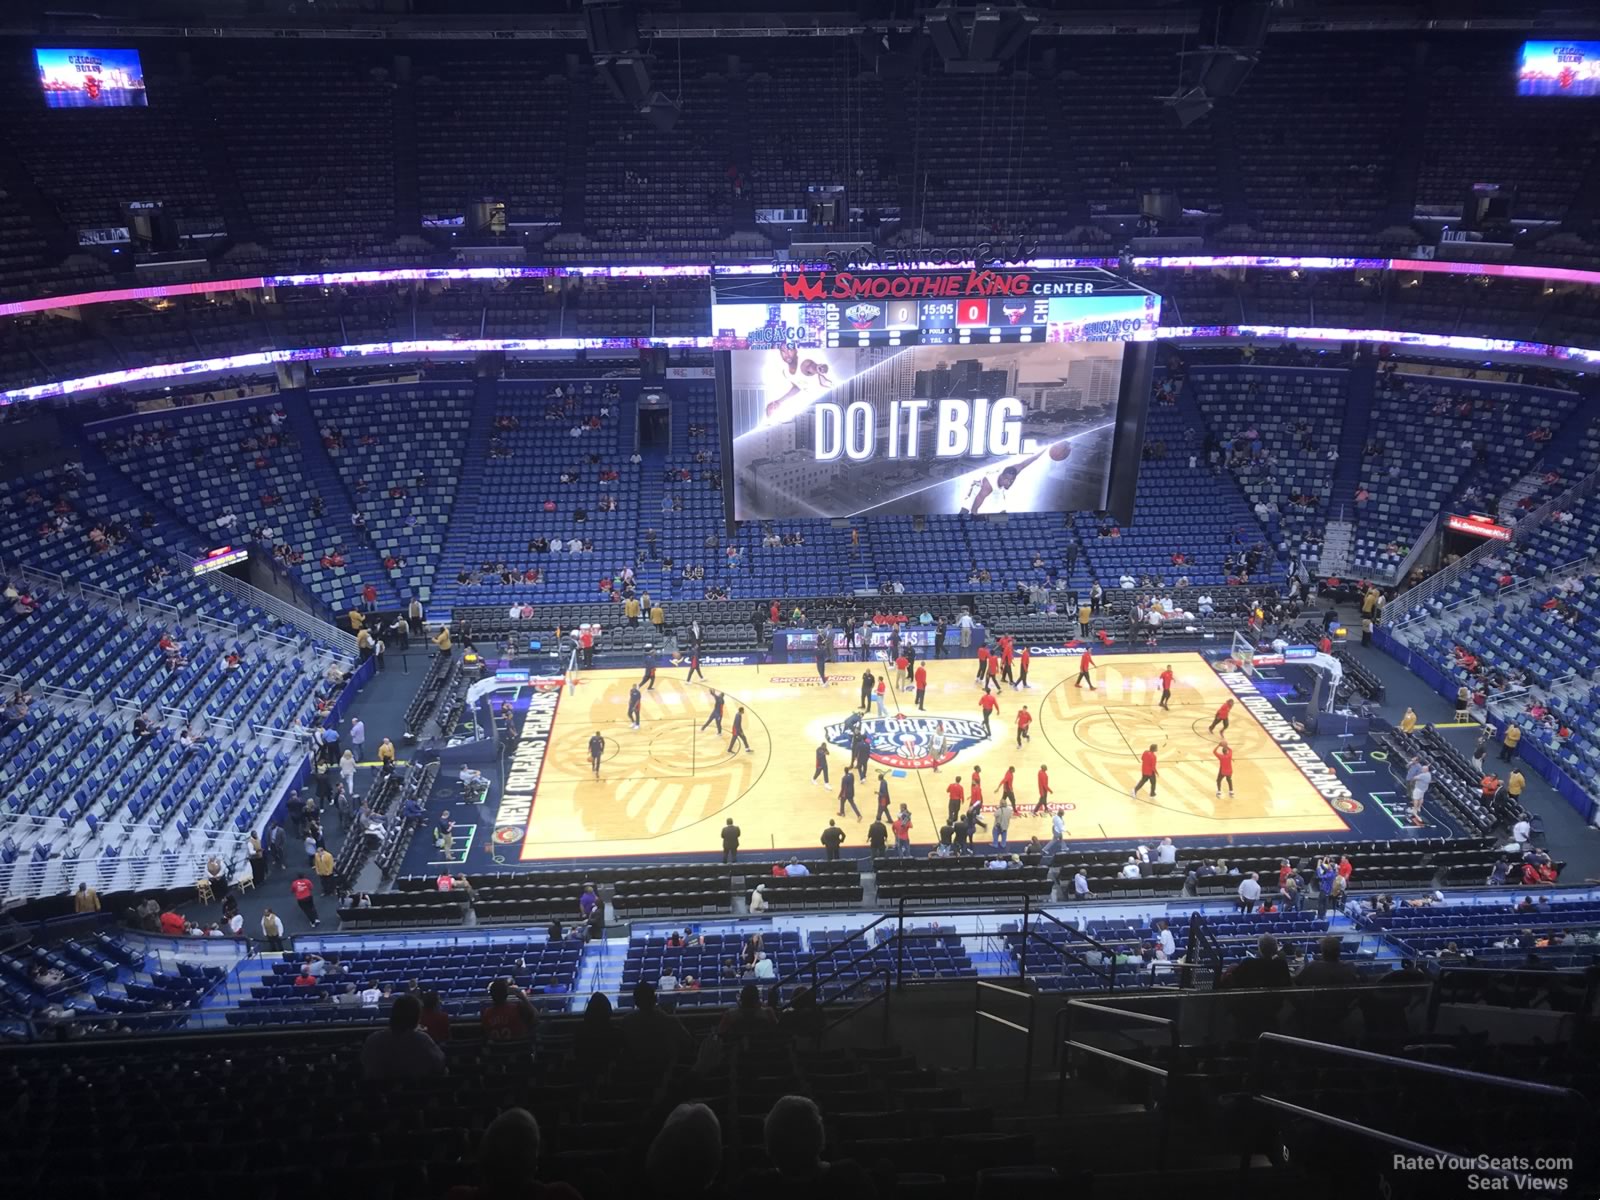 section 301, row 16 seat view  for basketball - smoothie king center